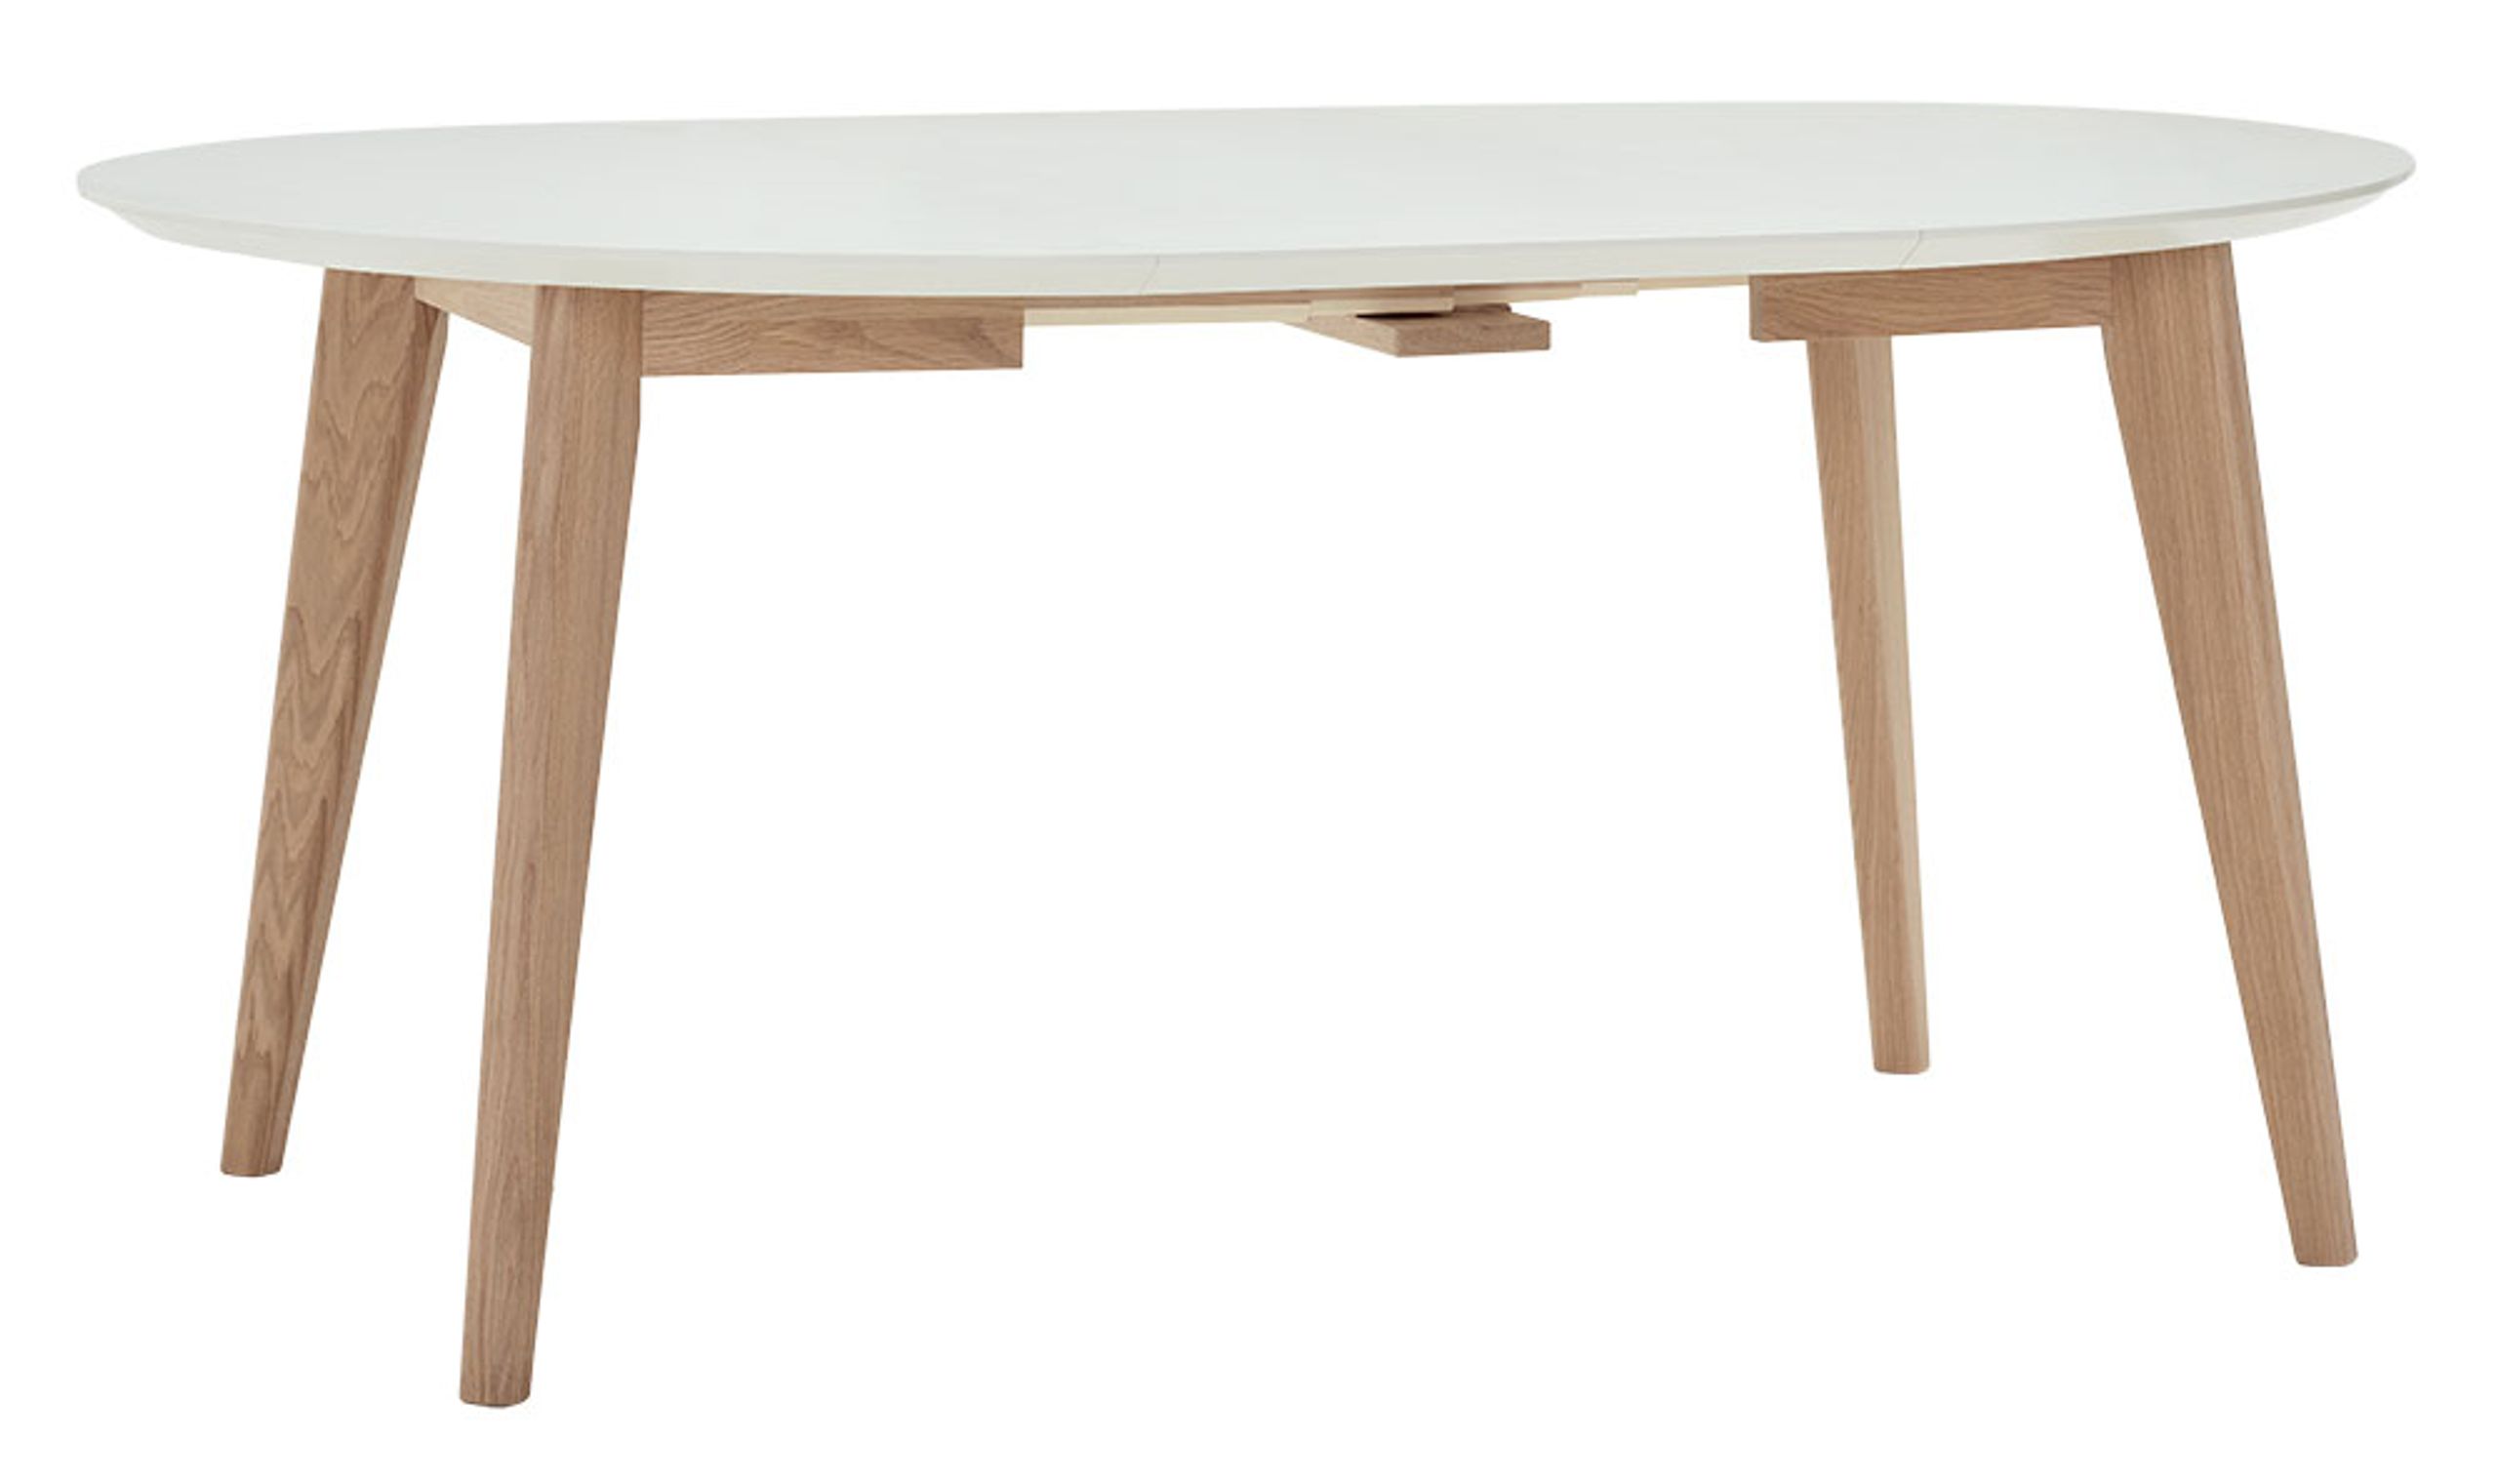 Andersen Furniture - Table à manger - AD1 Extraction Table - Laminate - White Mat Lacquered Oak/White Laminate